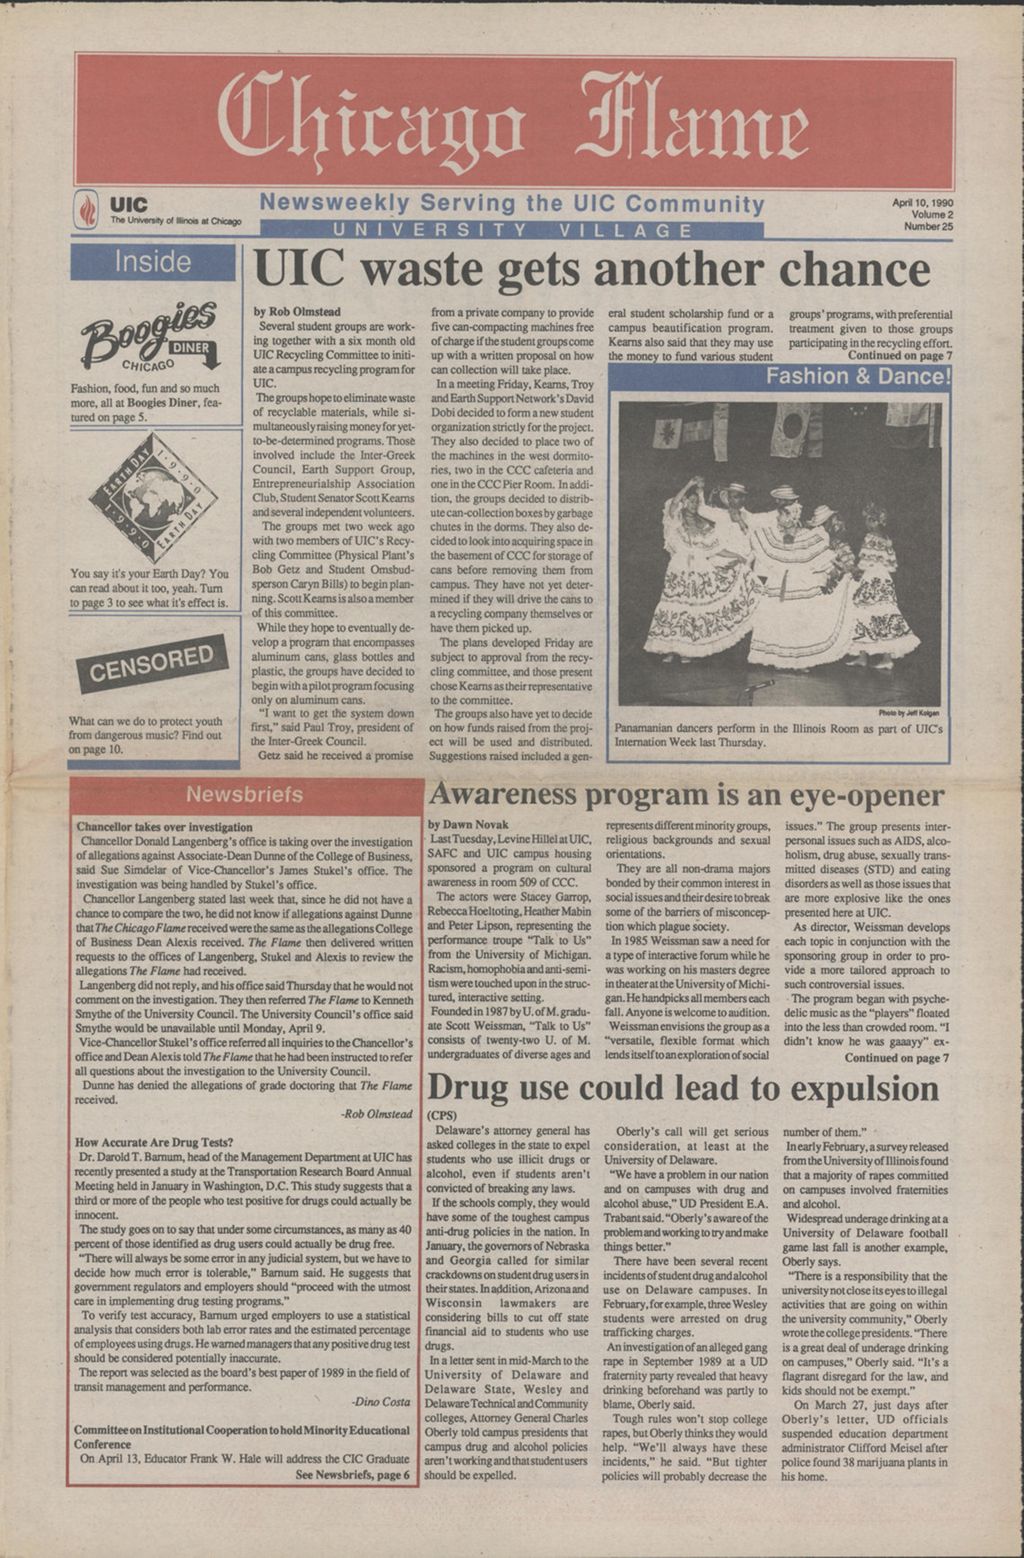 Chicago Flame (April 10, 1990)